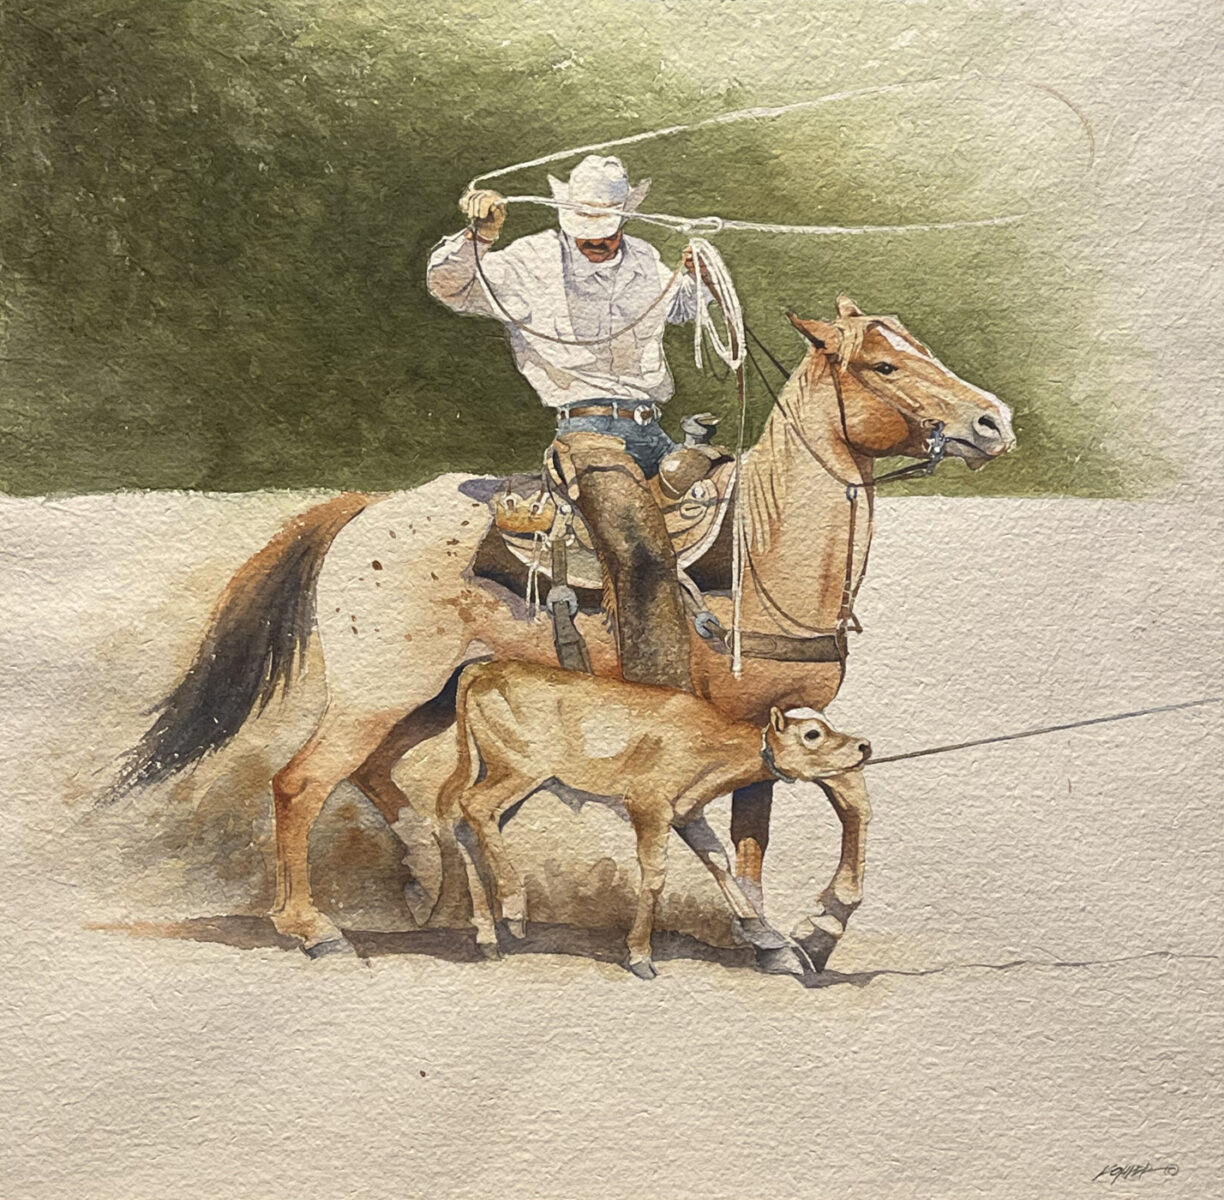 Watercolor painting of man in a rodeo riding horse by Mark Kohler